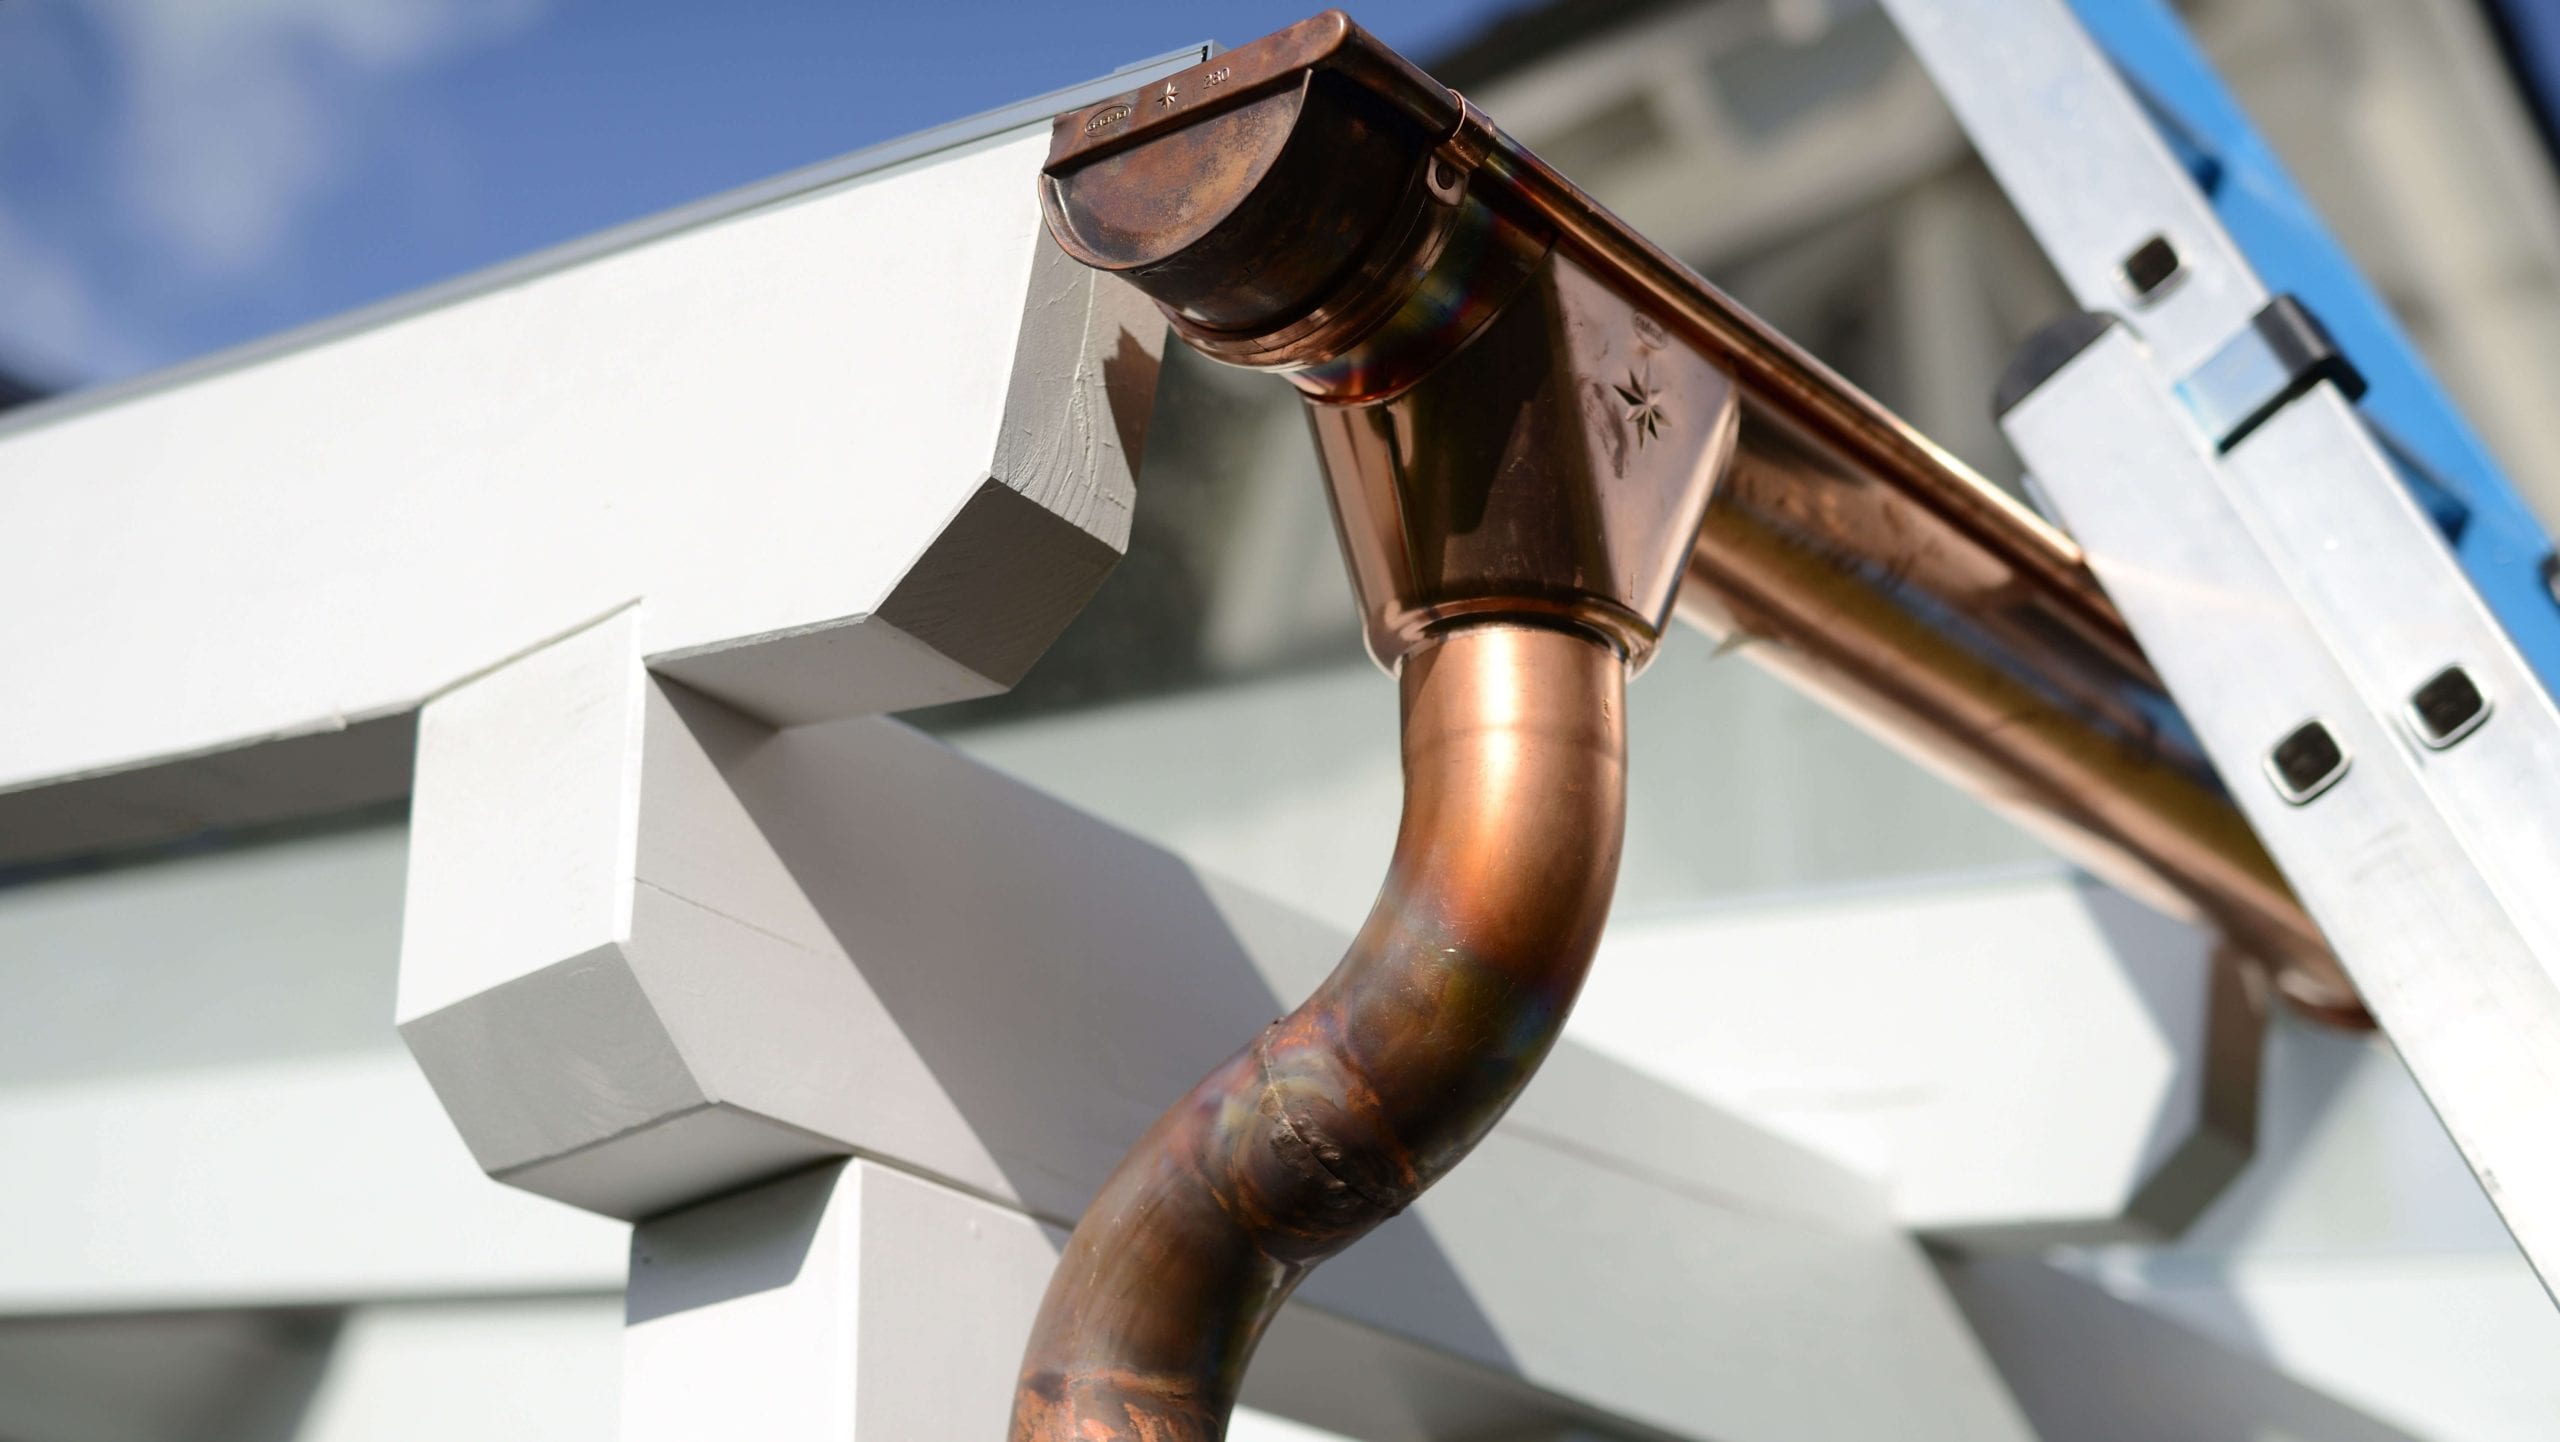 Make your property stand out with copper gutters. Contact for gutter installation in Boone